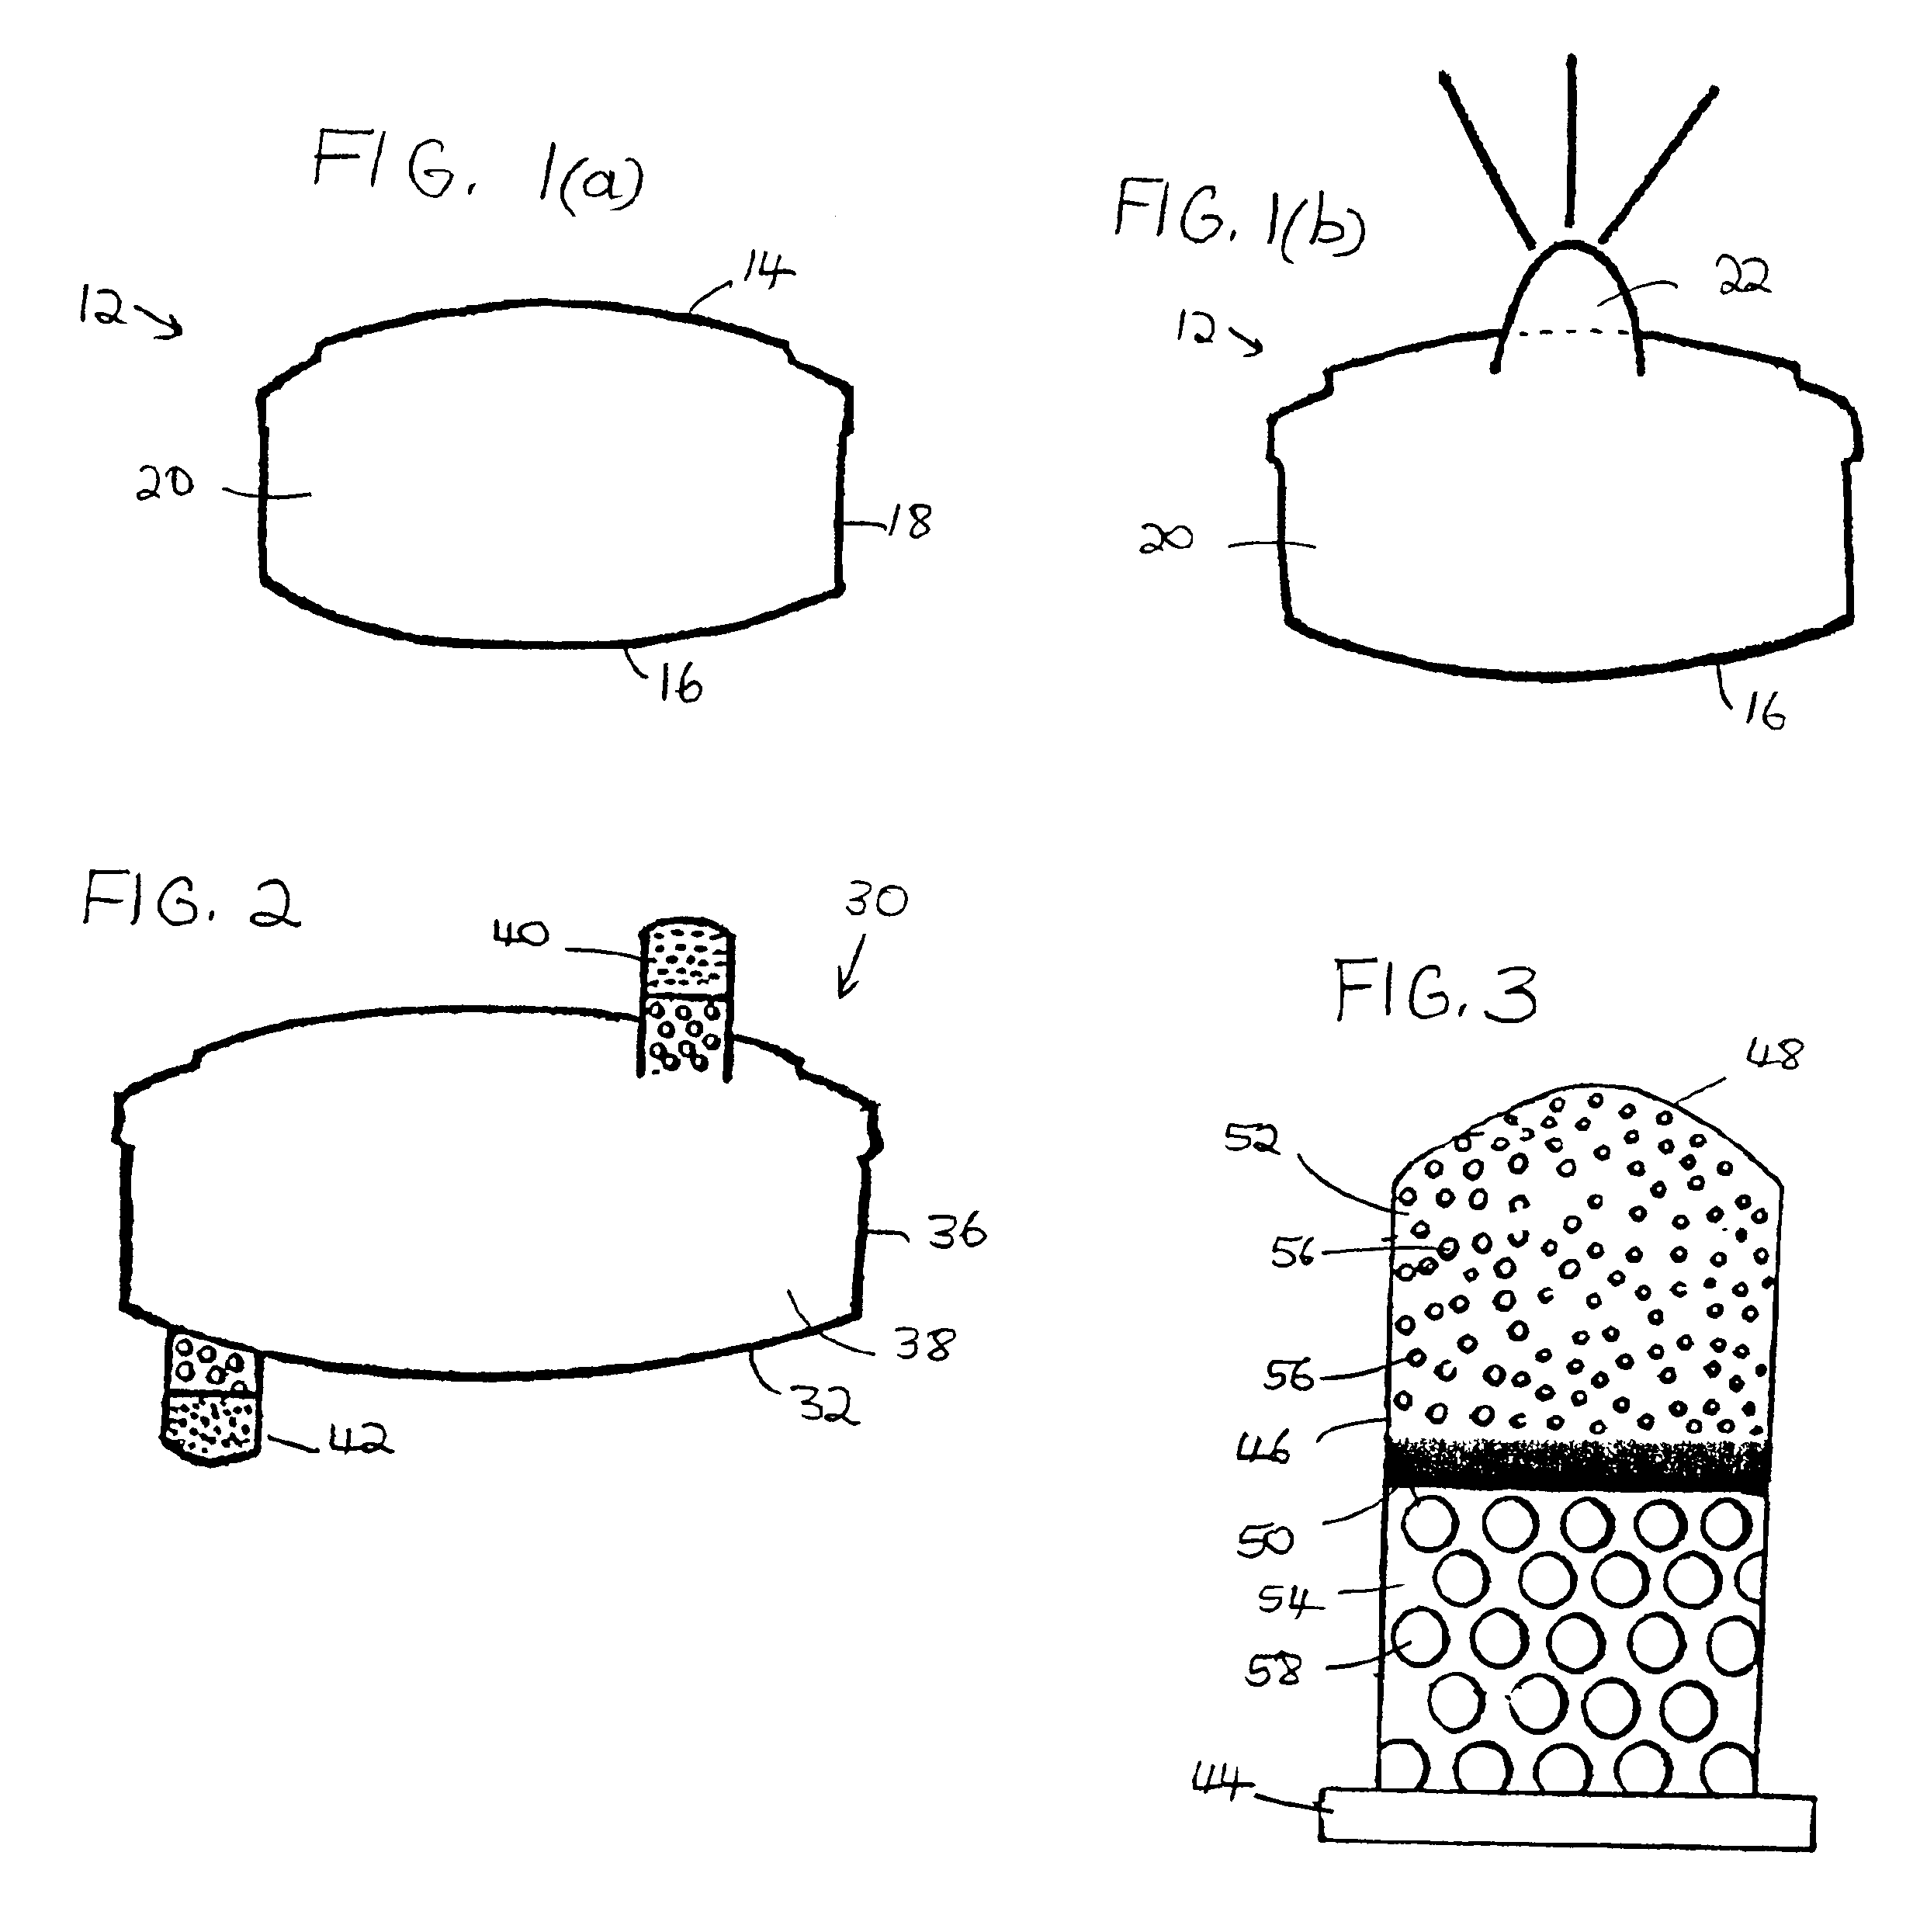 Method and apparatus for detecting target objects